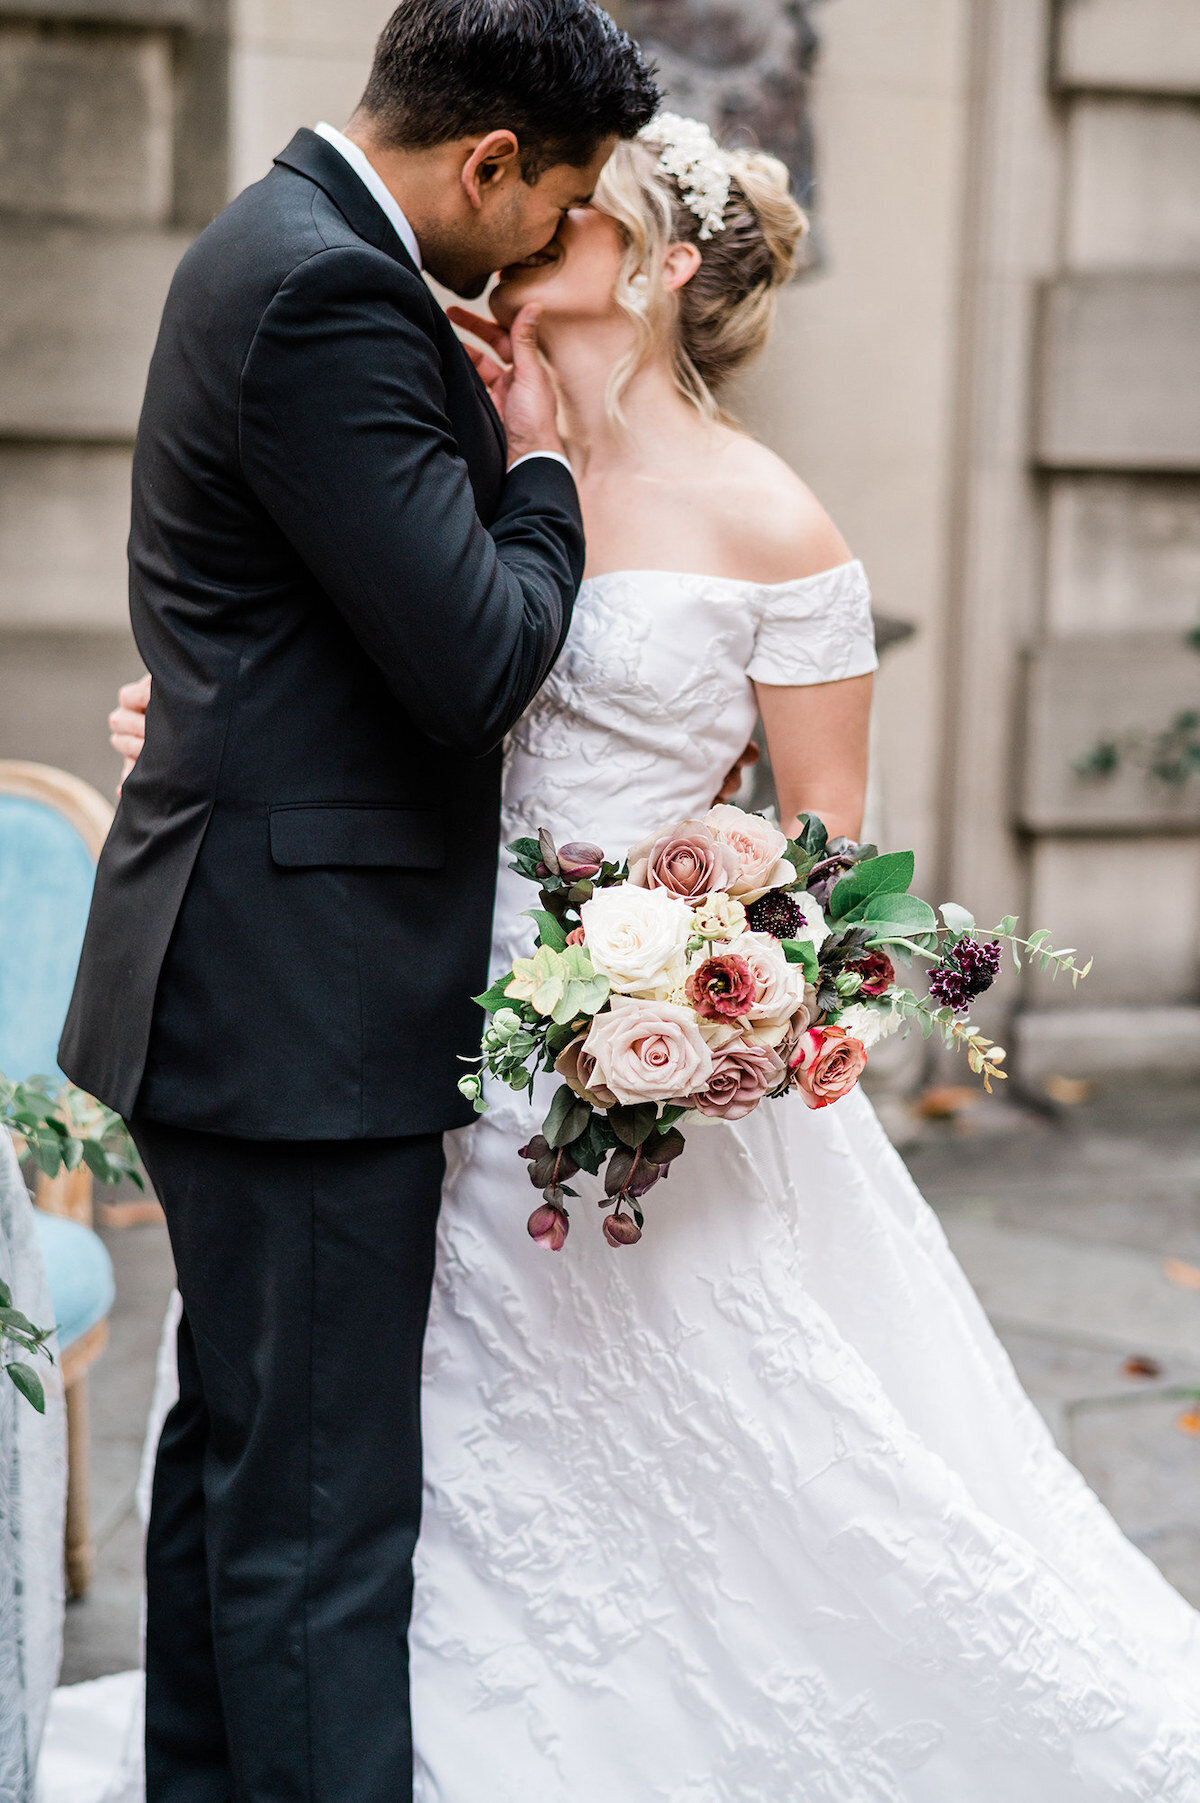 From candid exchanges to profound vows, our luxury wedding photography captures the essence of your Washington DC celebration. Our fine art approach turns every moment into a timeless memory against the backdrop of The Larz Anderson House.